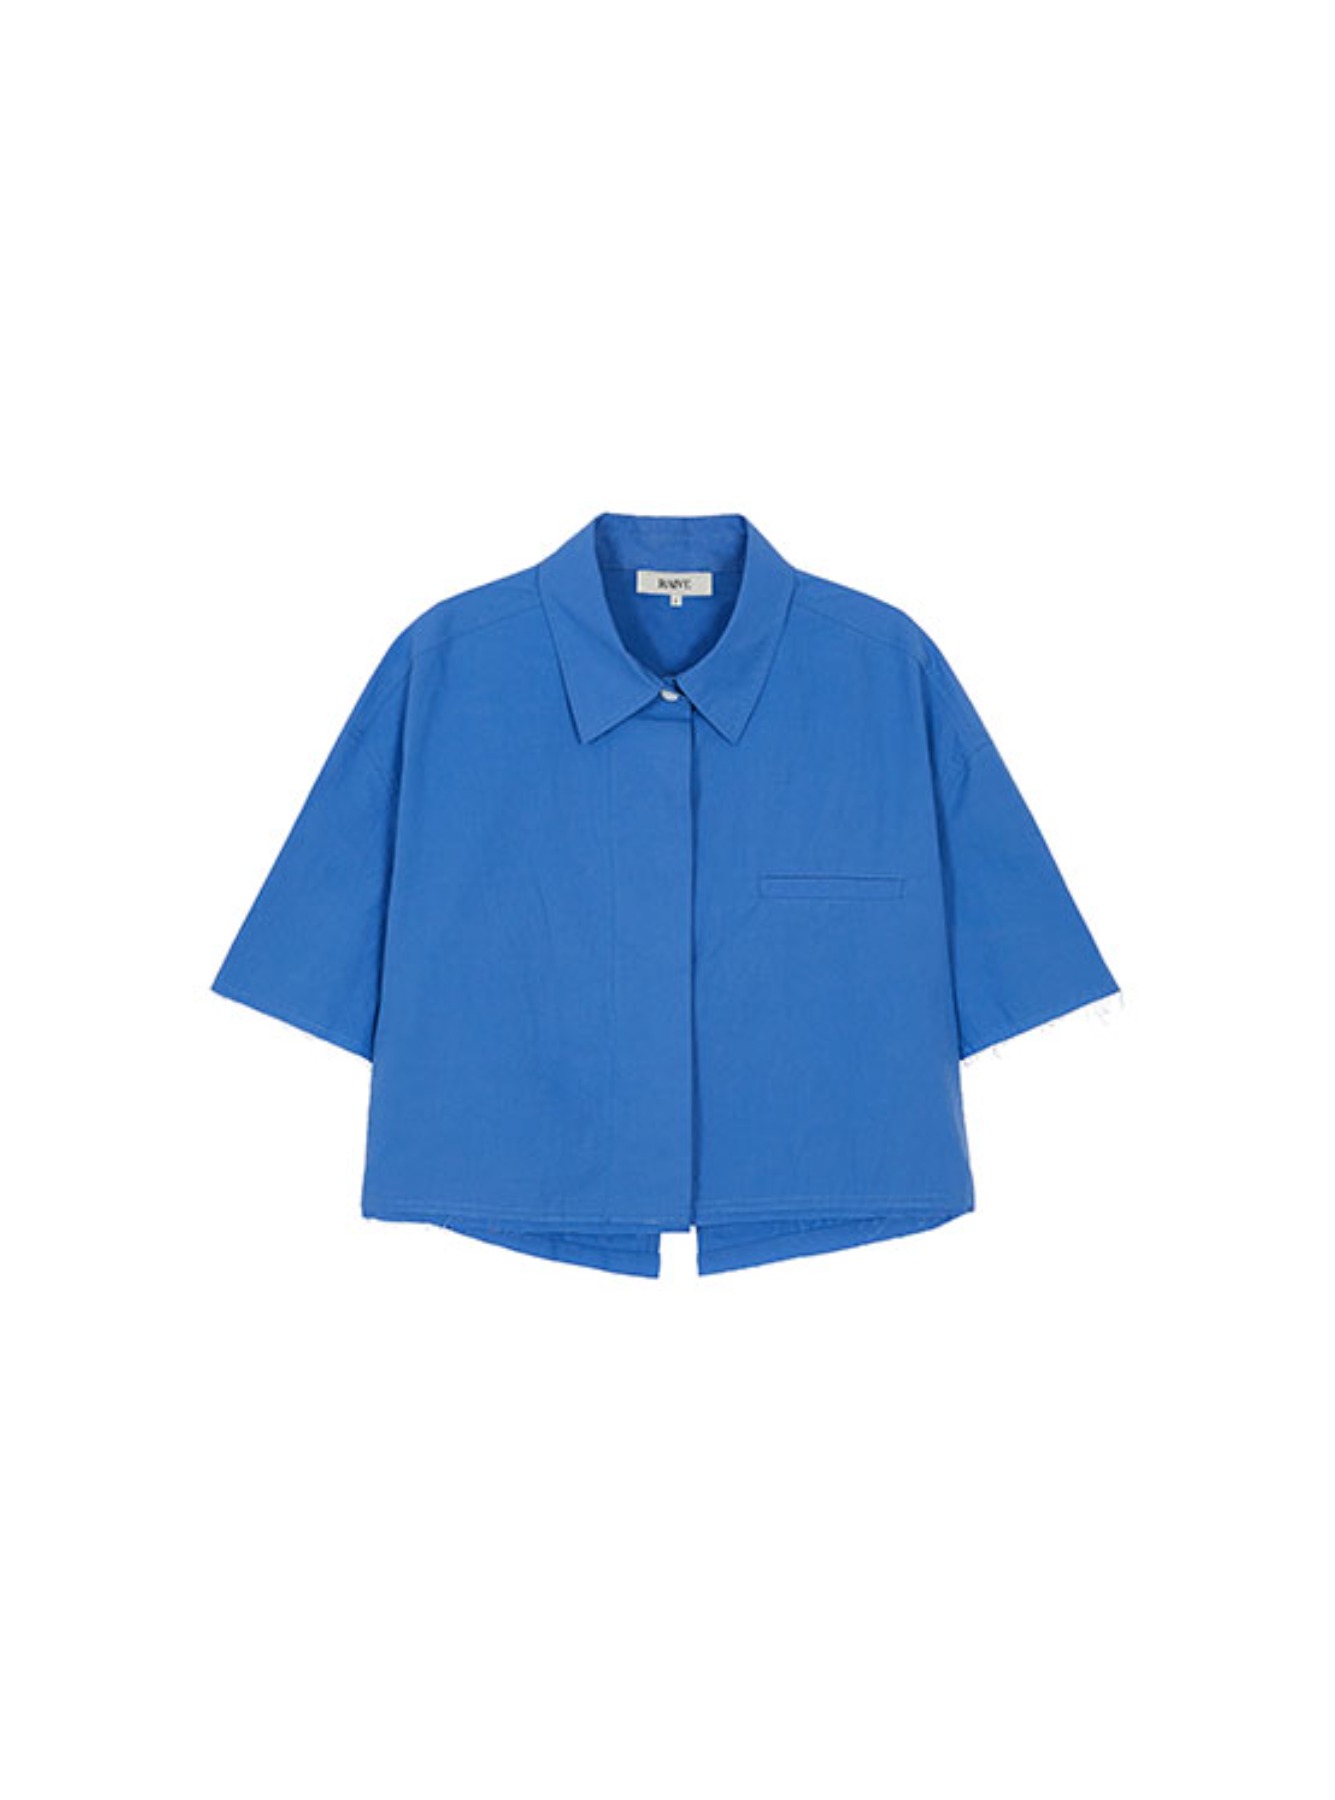 Back Cutting Cropped Shirt in Blue VW2MB159-22